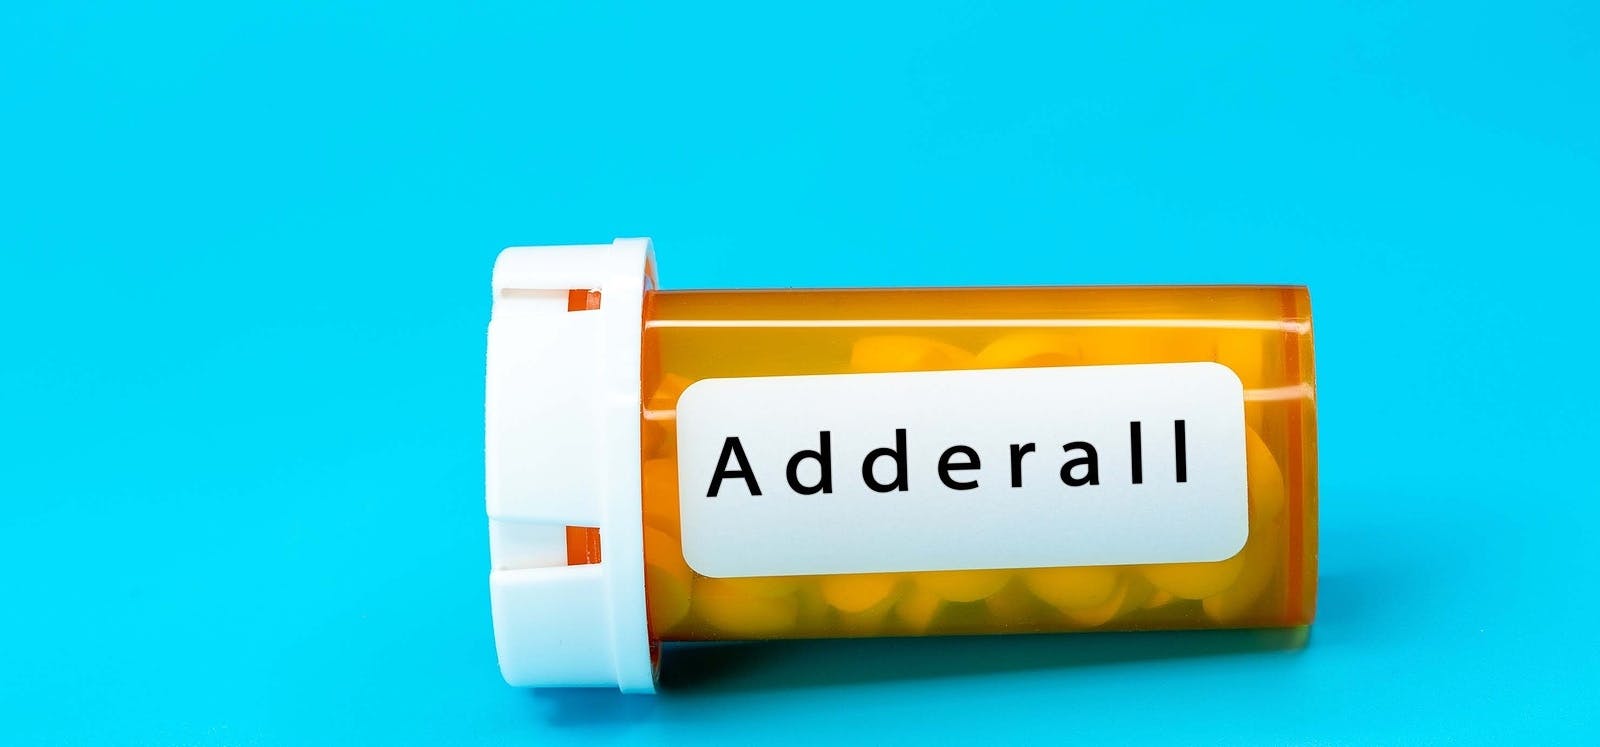 Pill bottled labeled Adderall